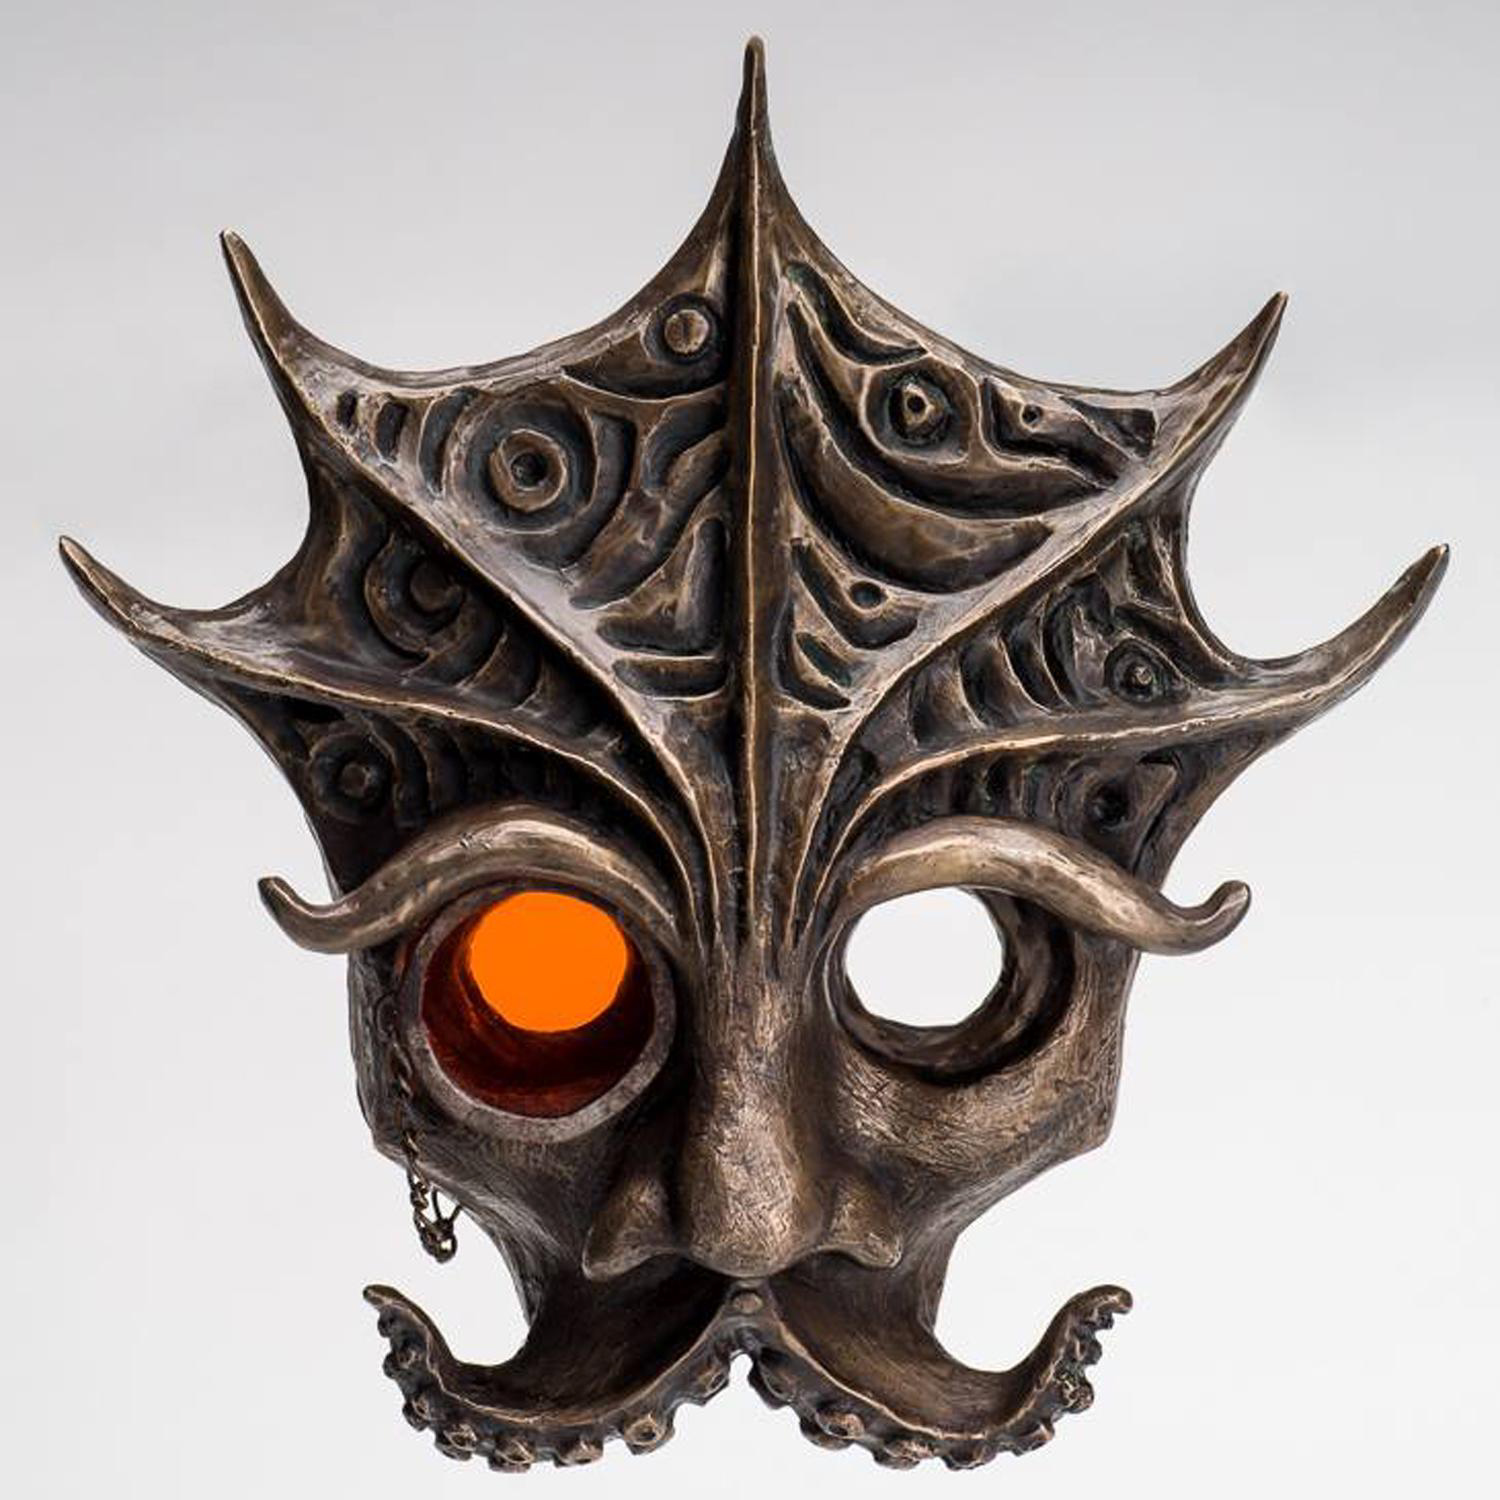 A metal sculptural face with octopus tentacles forming a mustache, broad nose, and expressive eyebrows; the forehead has deep carvings and ridges gracefully extending upwards; one eye has an orange lensed monocle with chain